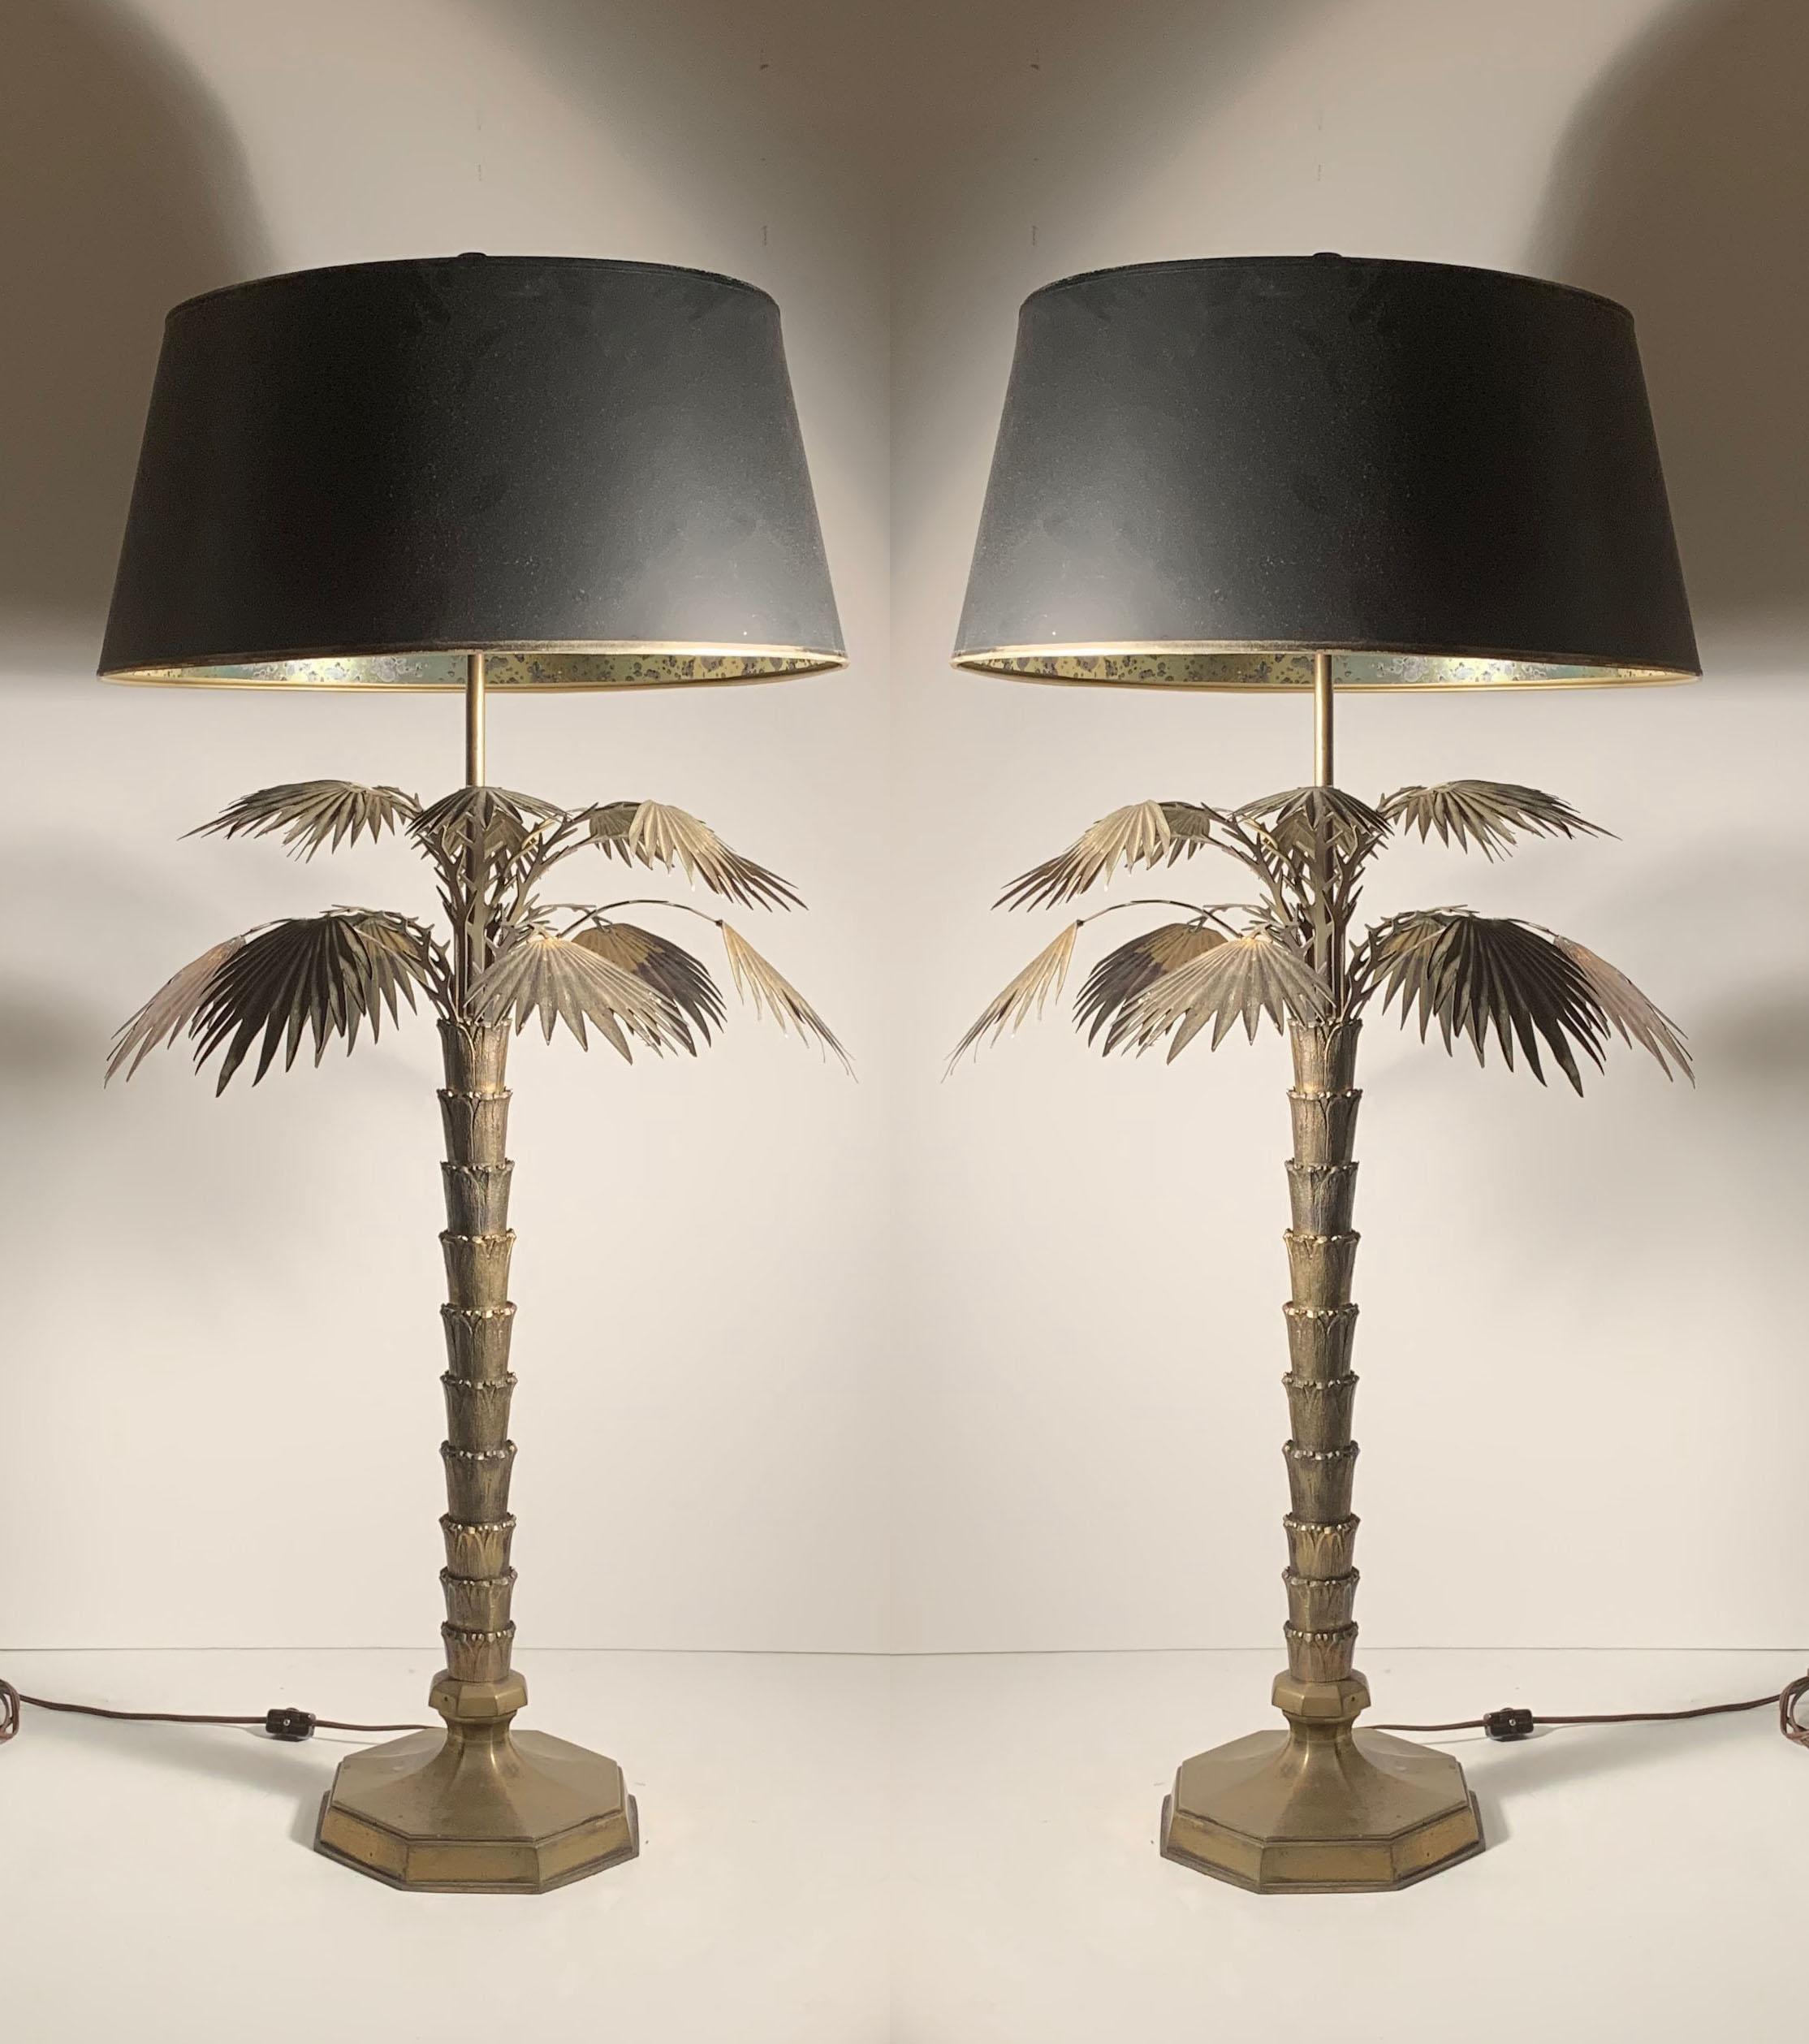 Pair of vintage 1970s brass Chapman Palm lamps.

Comes with 2 shades. 1 of them has a metal diffuser as well on top.